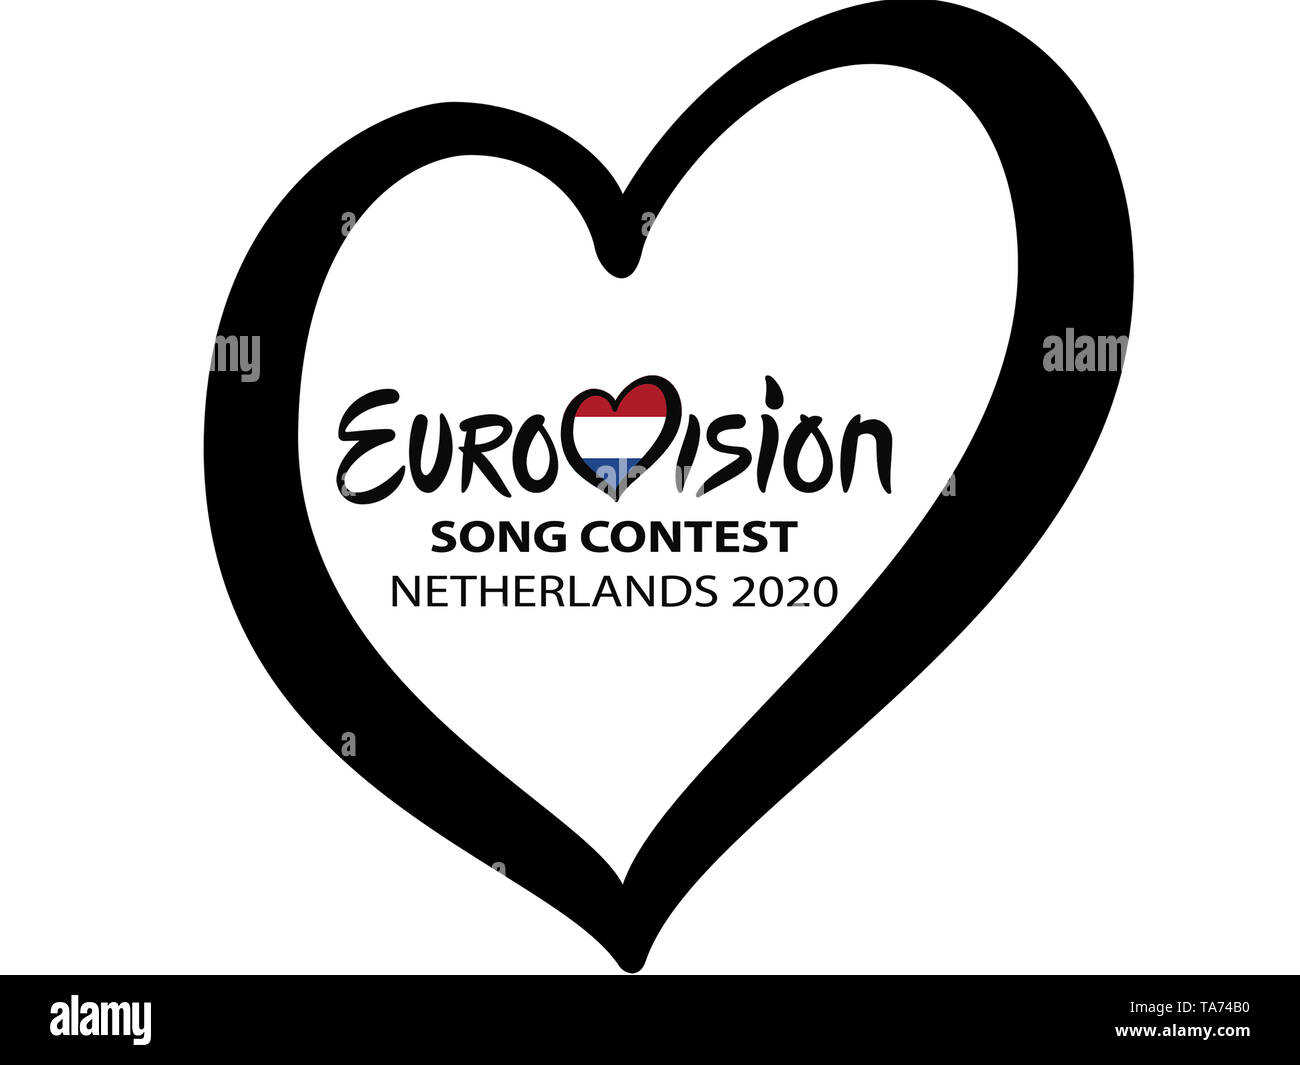 TEL AVIV, ISRAEL - May 2019: Winner of Eurovision Song Contest 2019. Text Netherlands 2020 Eurovision Heart on white background Stock Photo